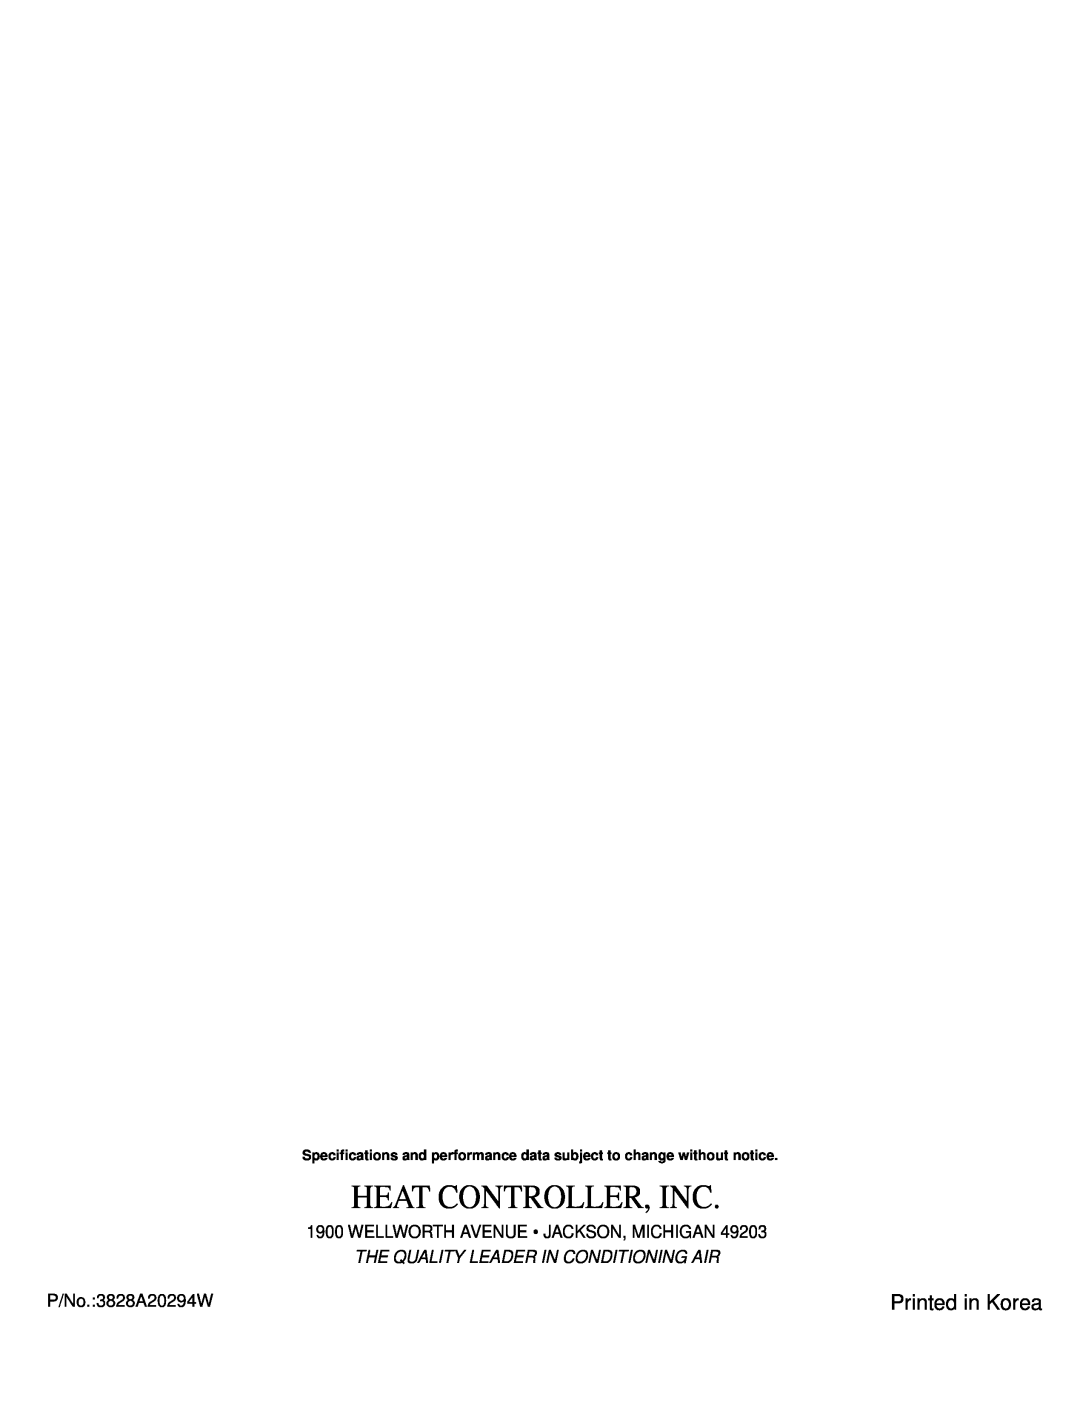 Heat Controller BG-103A service manual Heat Controller, Inc, The Quality Leader In Conditioning Air 